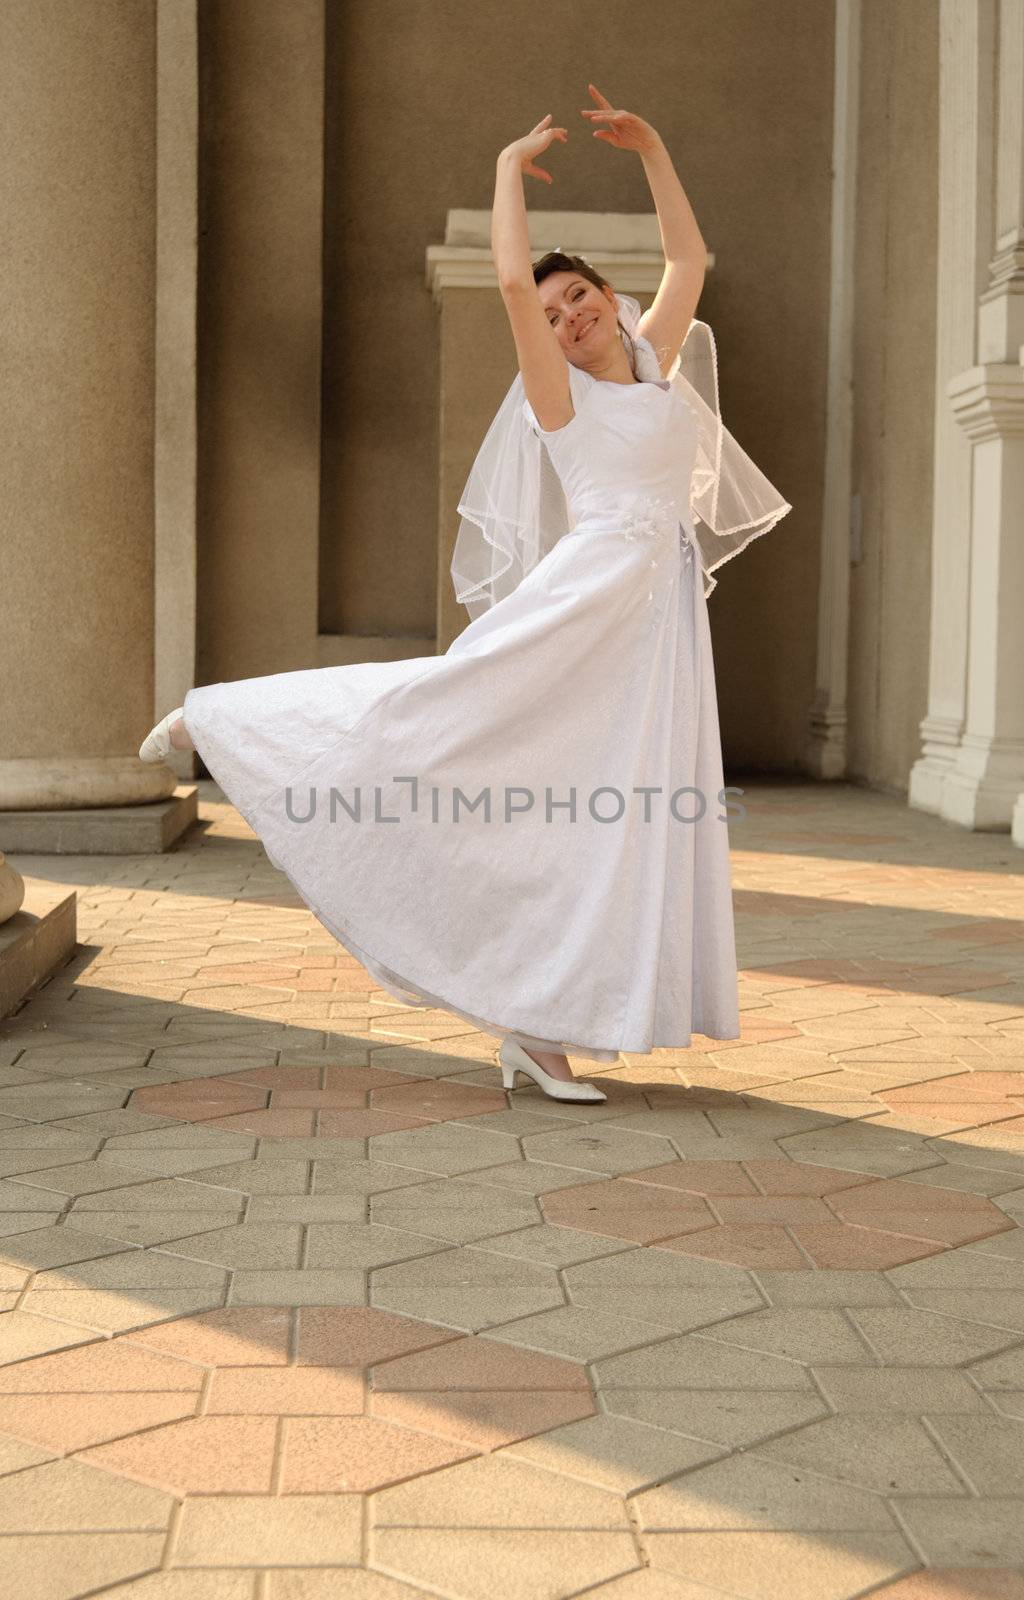 The dancing bride by galdzer